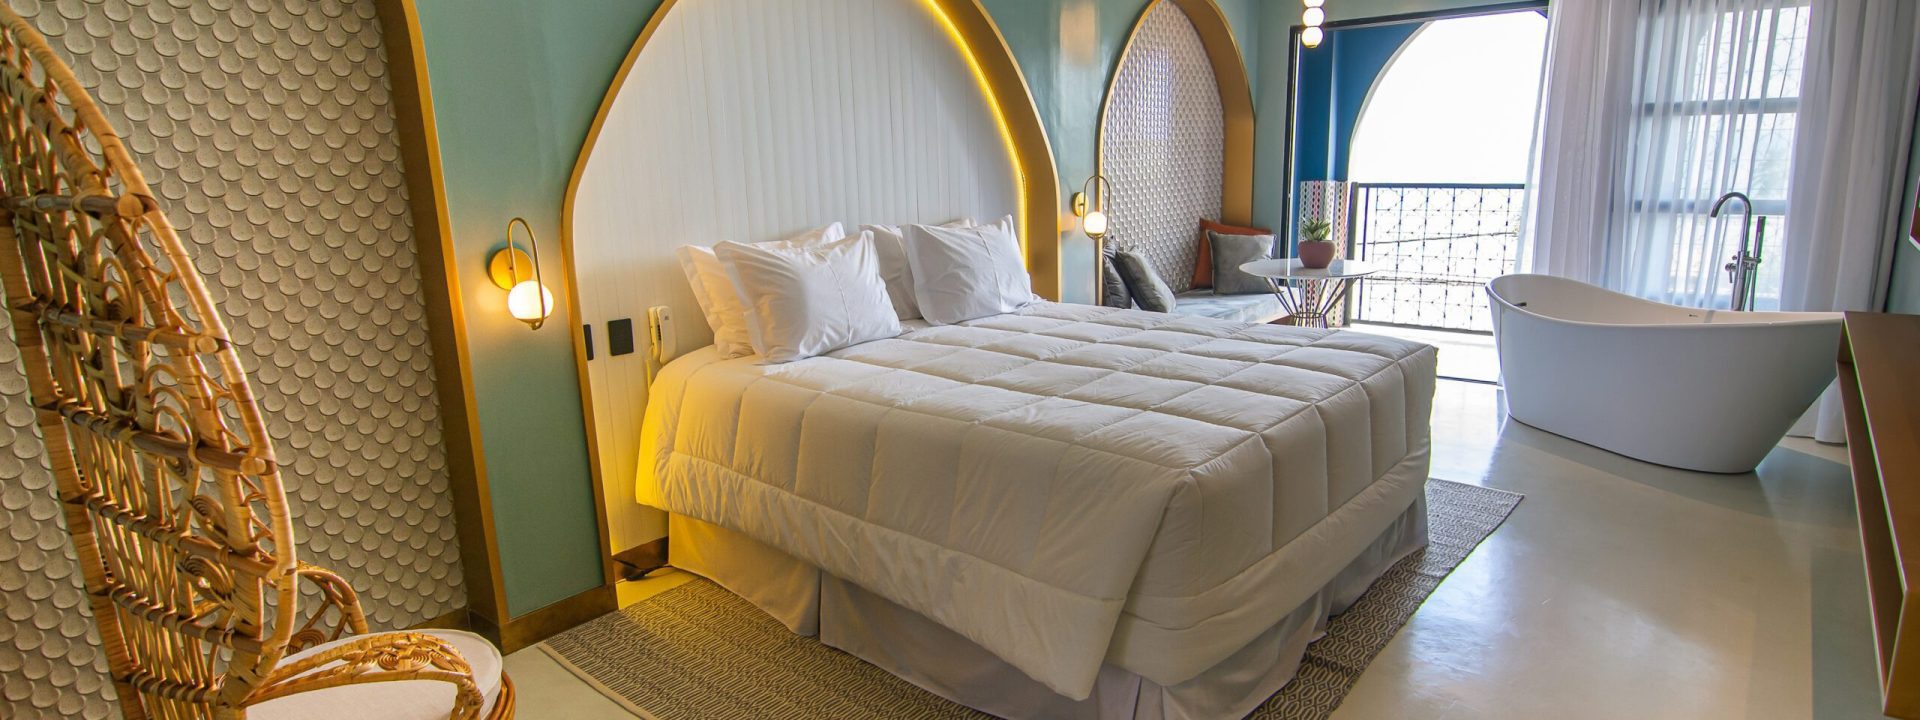 Deluxe Room with Ocean View: Enjoy luxury and comfort in our spacious room with a panoramic ocean view.